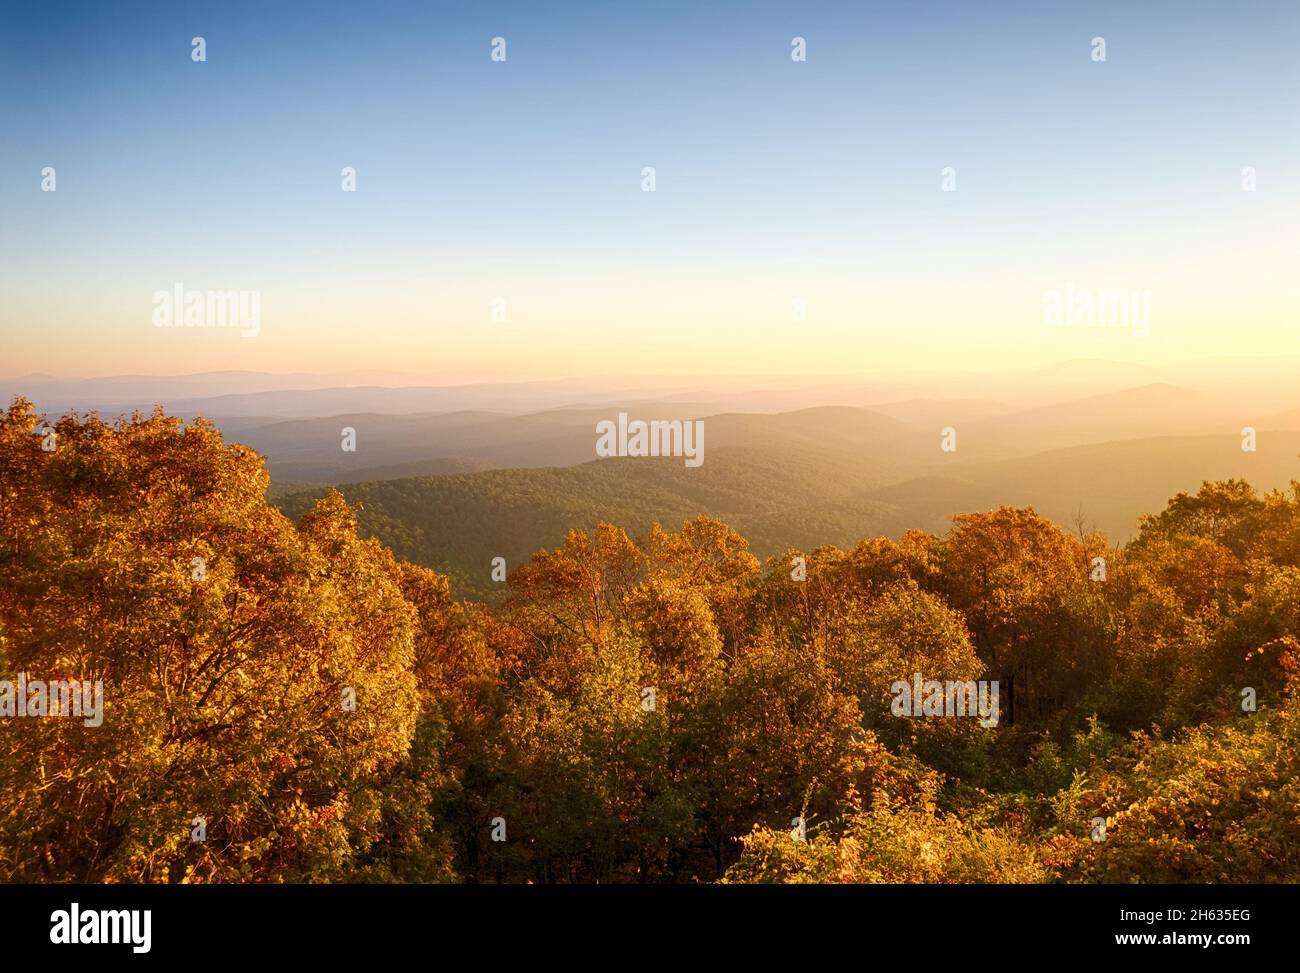 View at sunrise from a East side vista on Talimena Scenic Byway in Ouachita National Forest. Bright fall foliage in foreground trees, and heavy fog an Stock Photo